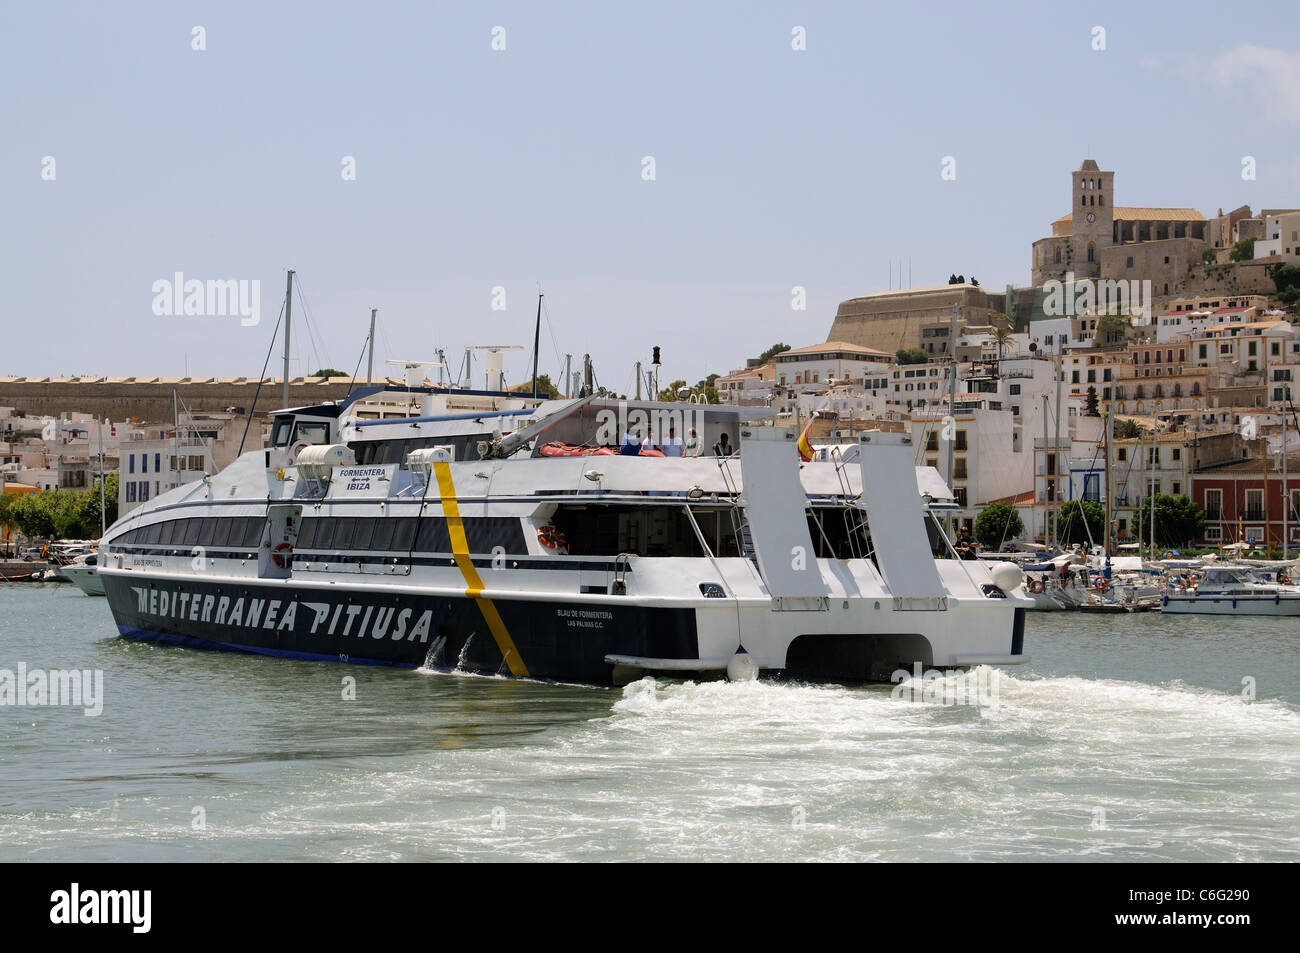 Inter island fast ferry departing the harbour overlooked by the old town of Eivissa on the Spanish Island of Ibiza Stock Photo